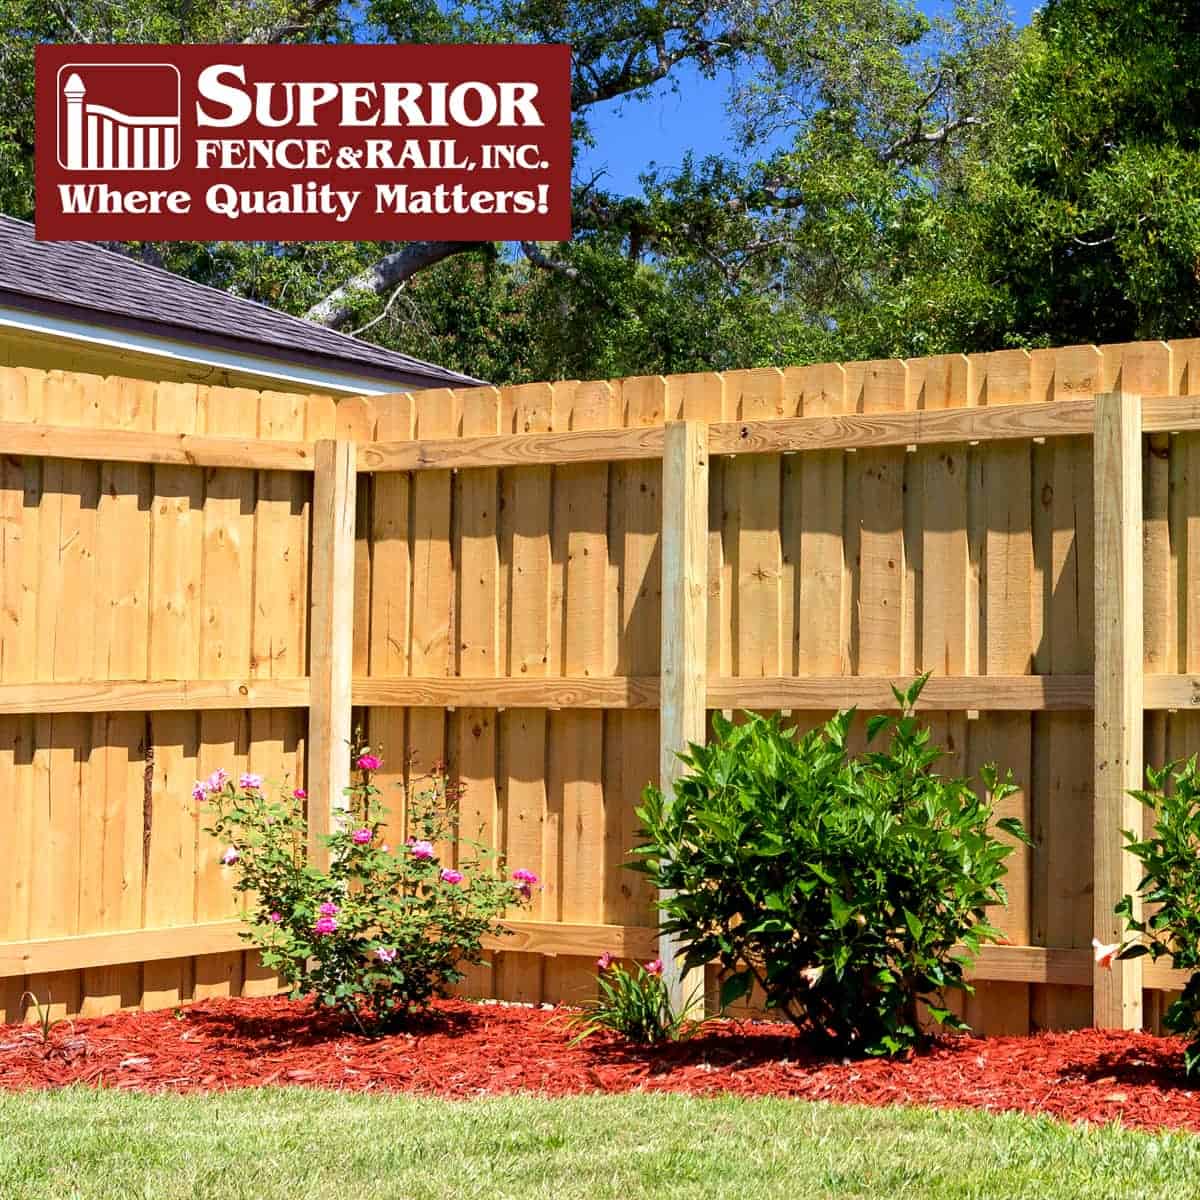 Brentwood fence company contractor